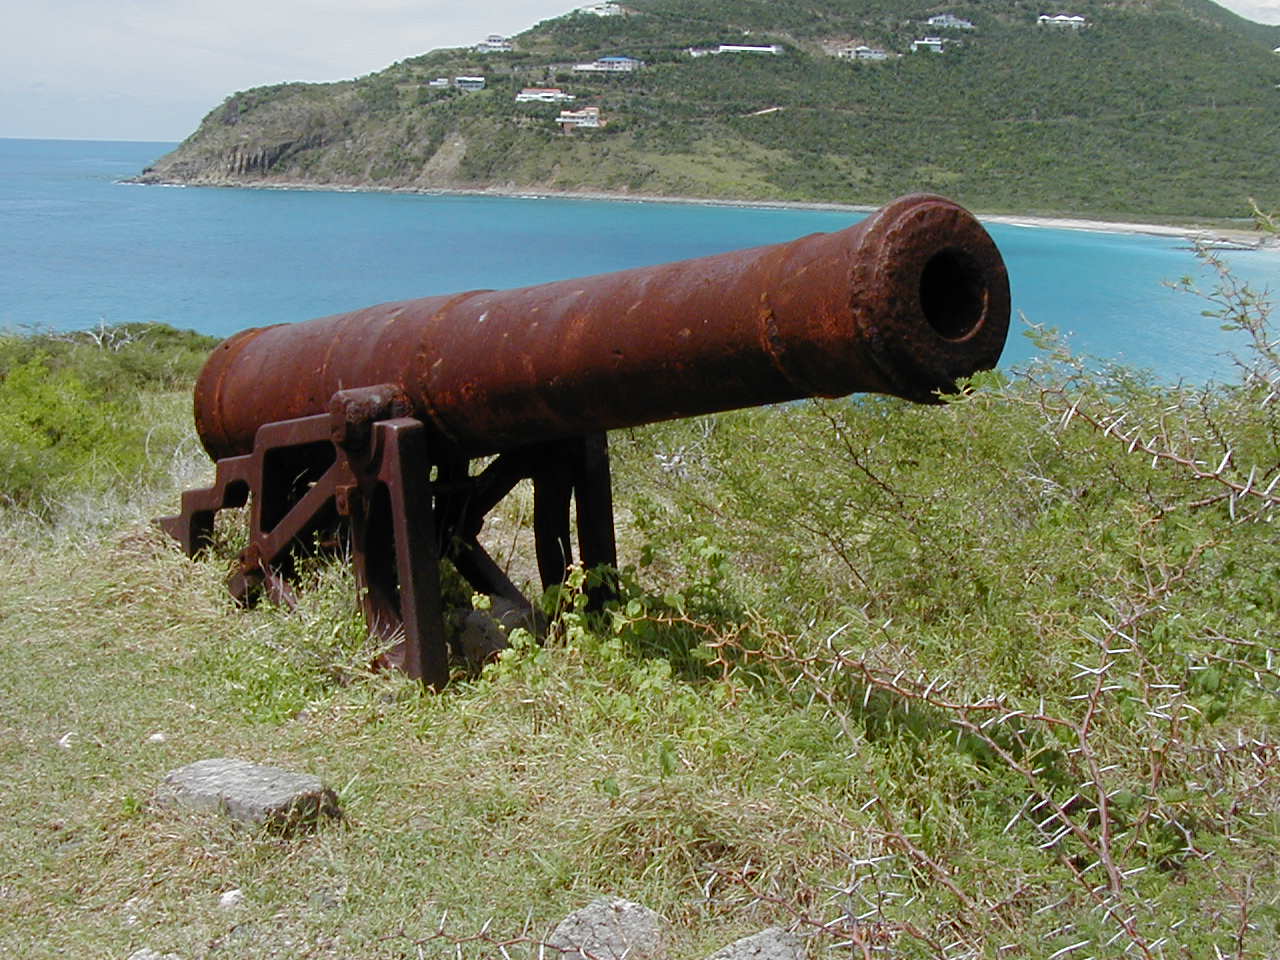 Picture of the Cannon in Ft. Amsterdam, St. Maarten